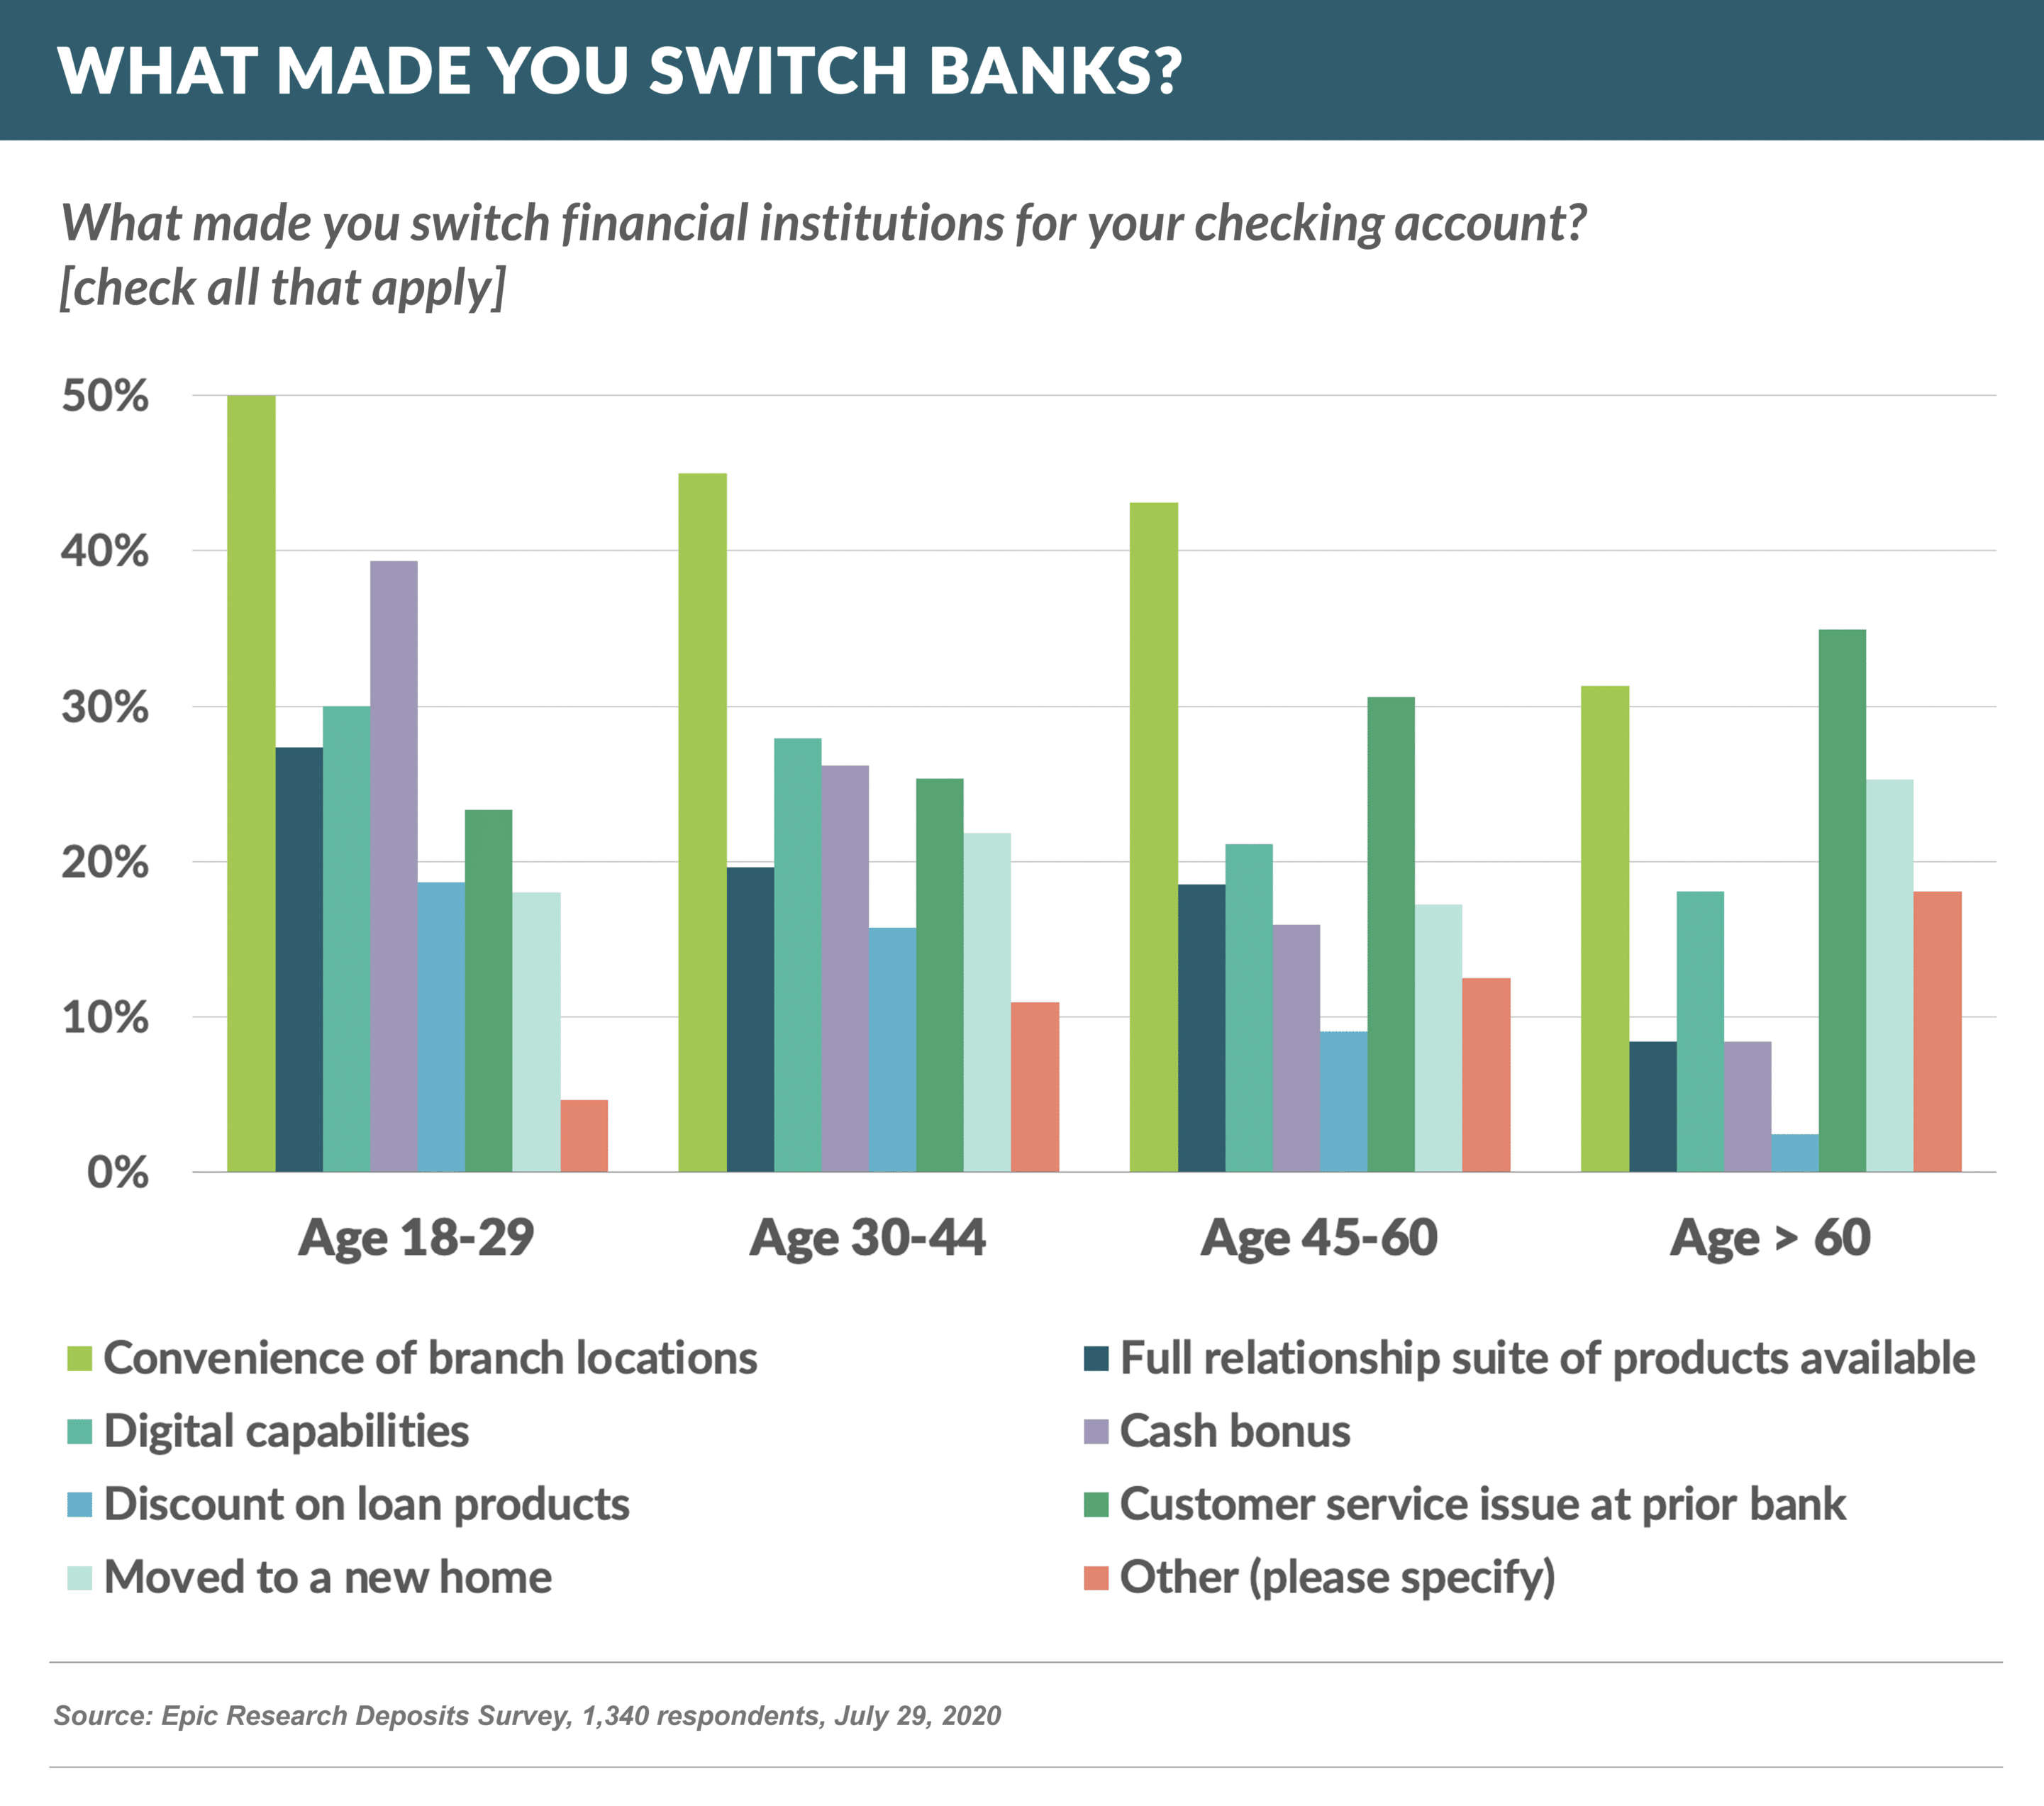 What made you switch banks